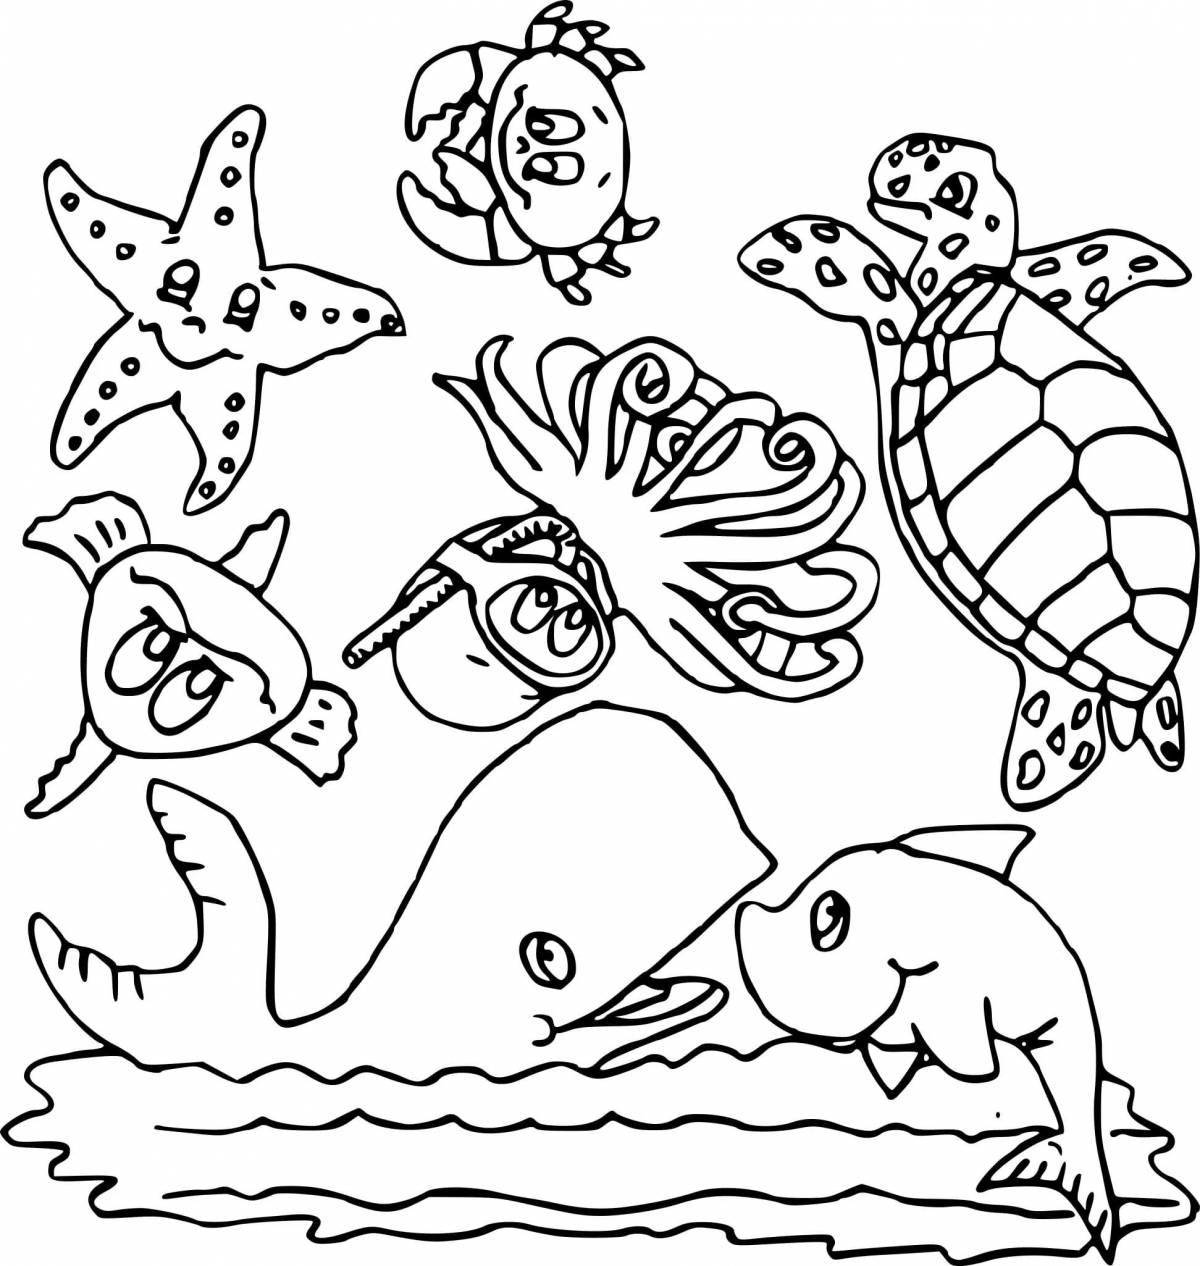 Living seabed coloring page for kids